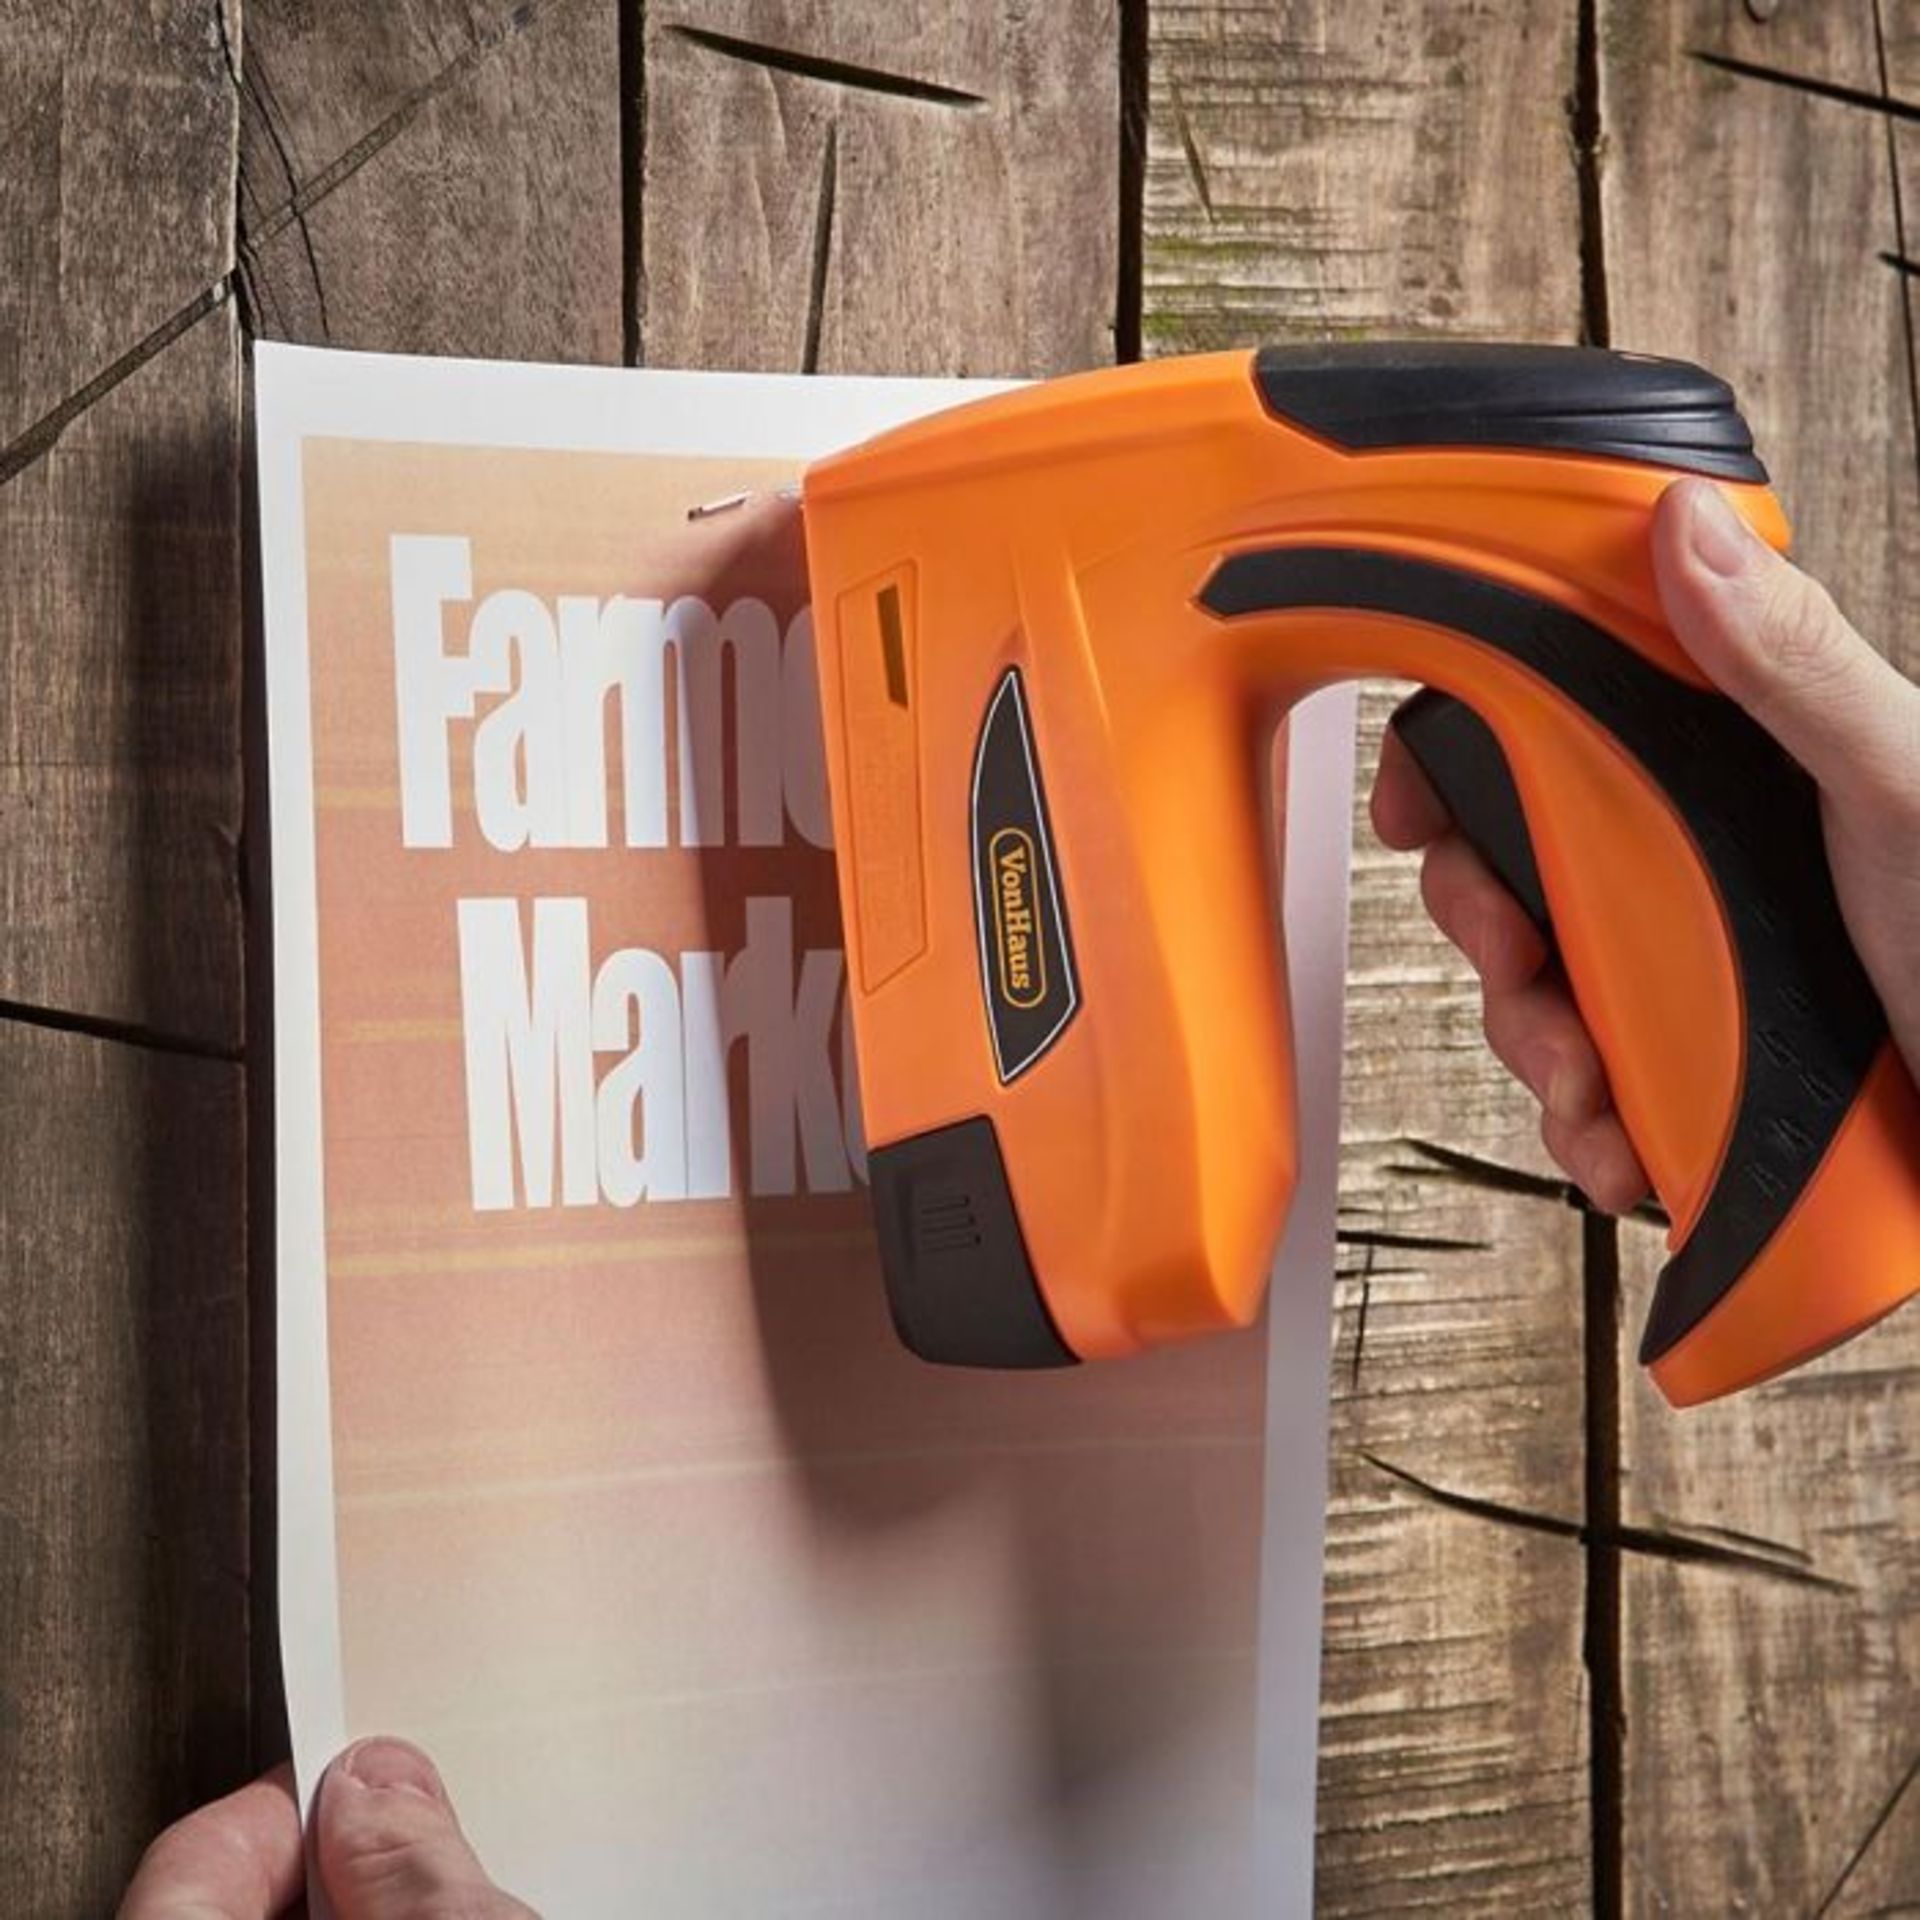 (V332) 3.6V Nailer & Stapler Ideal for crafting and decorating – quickly staple, nail or fas... - Image 4 of 4